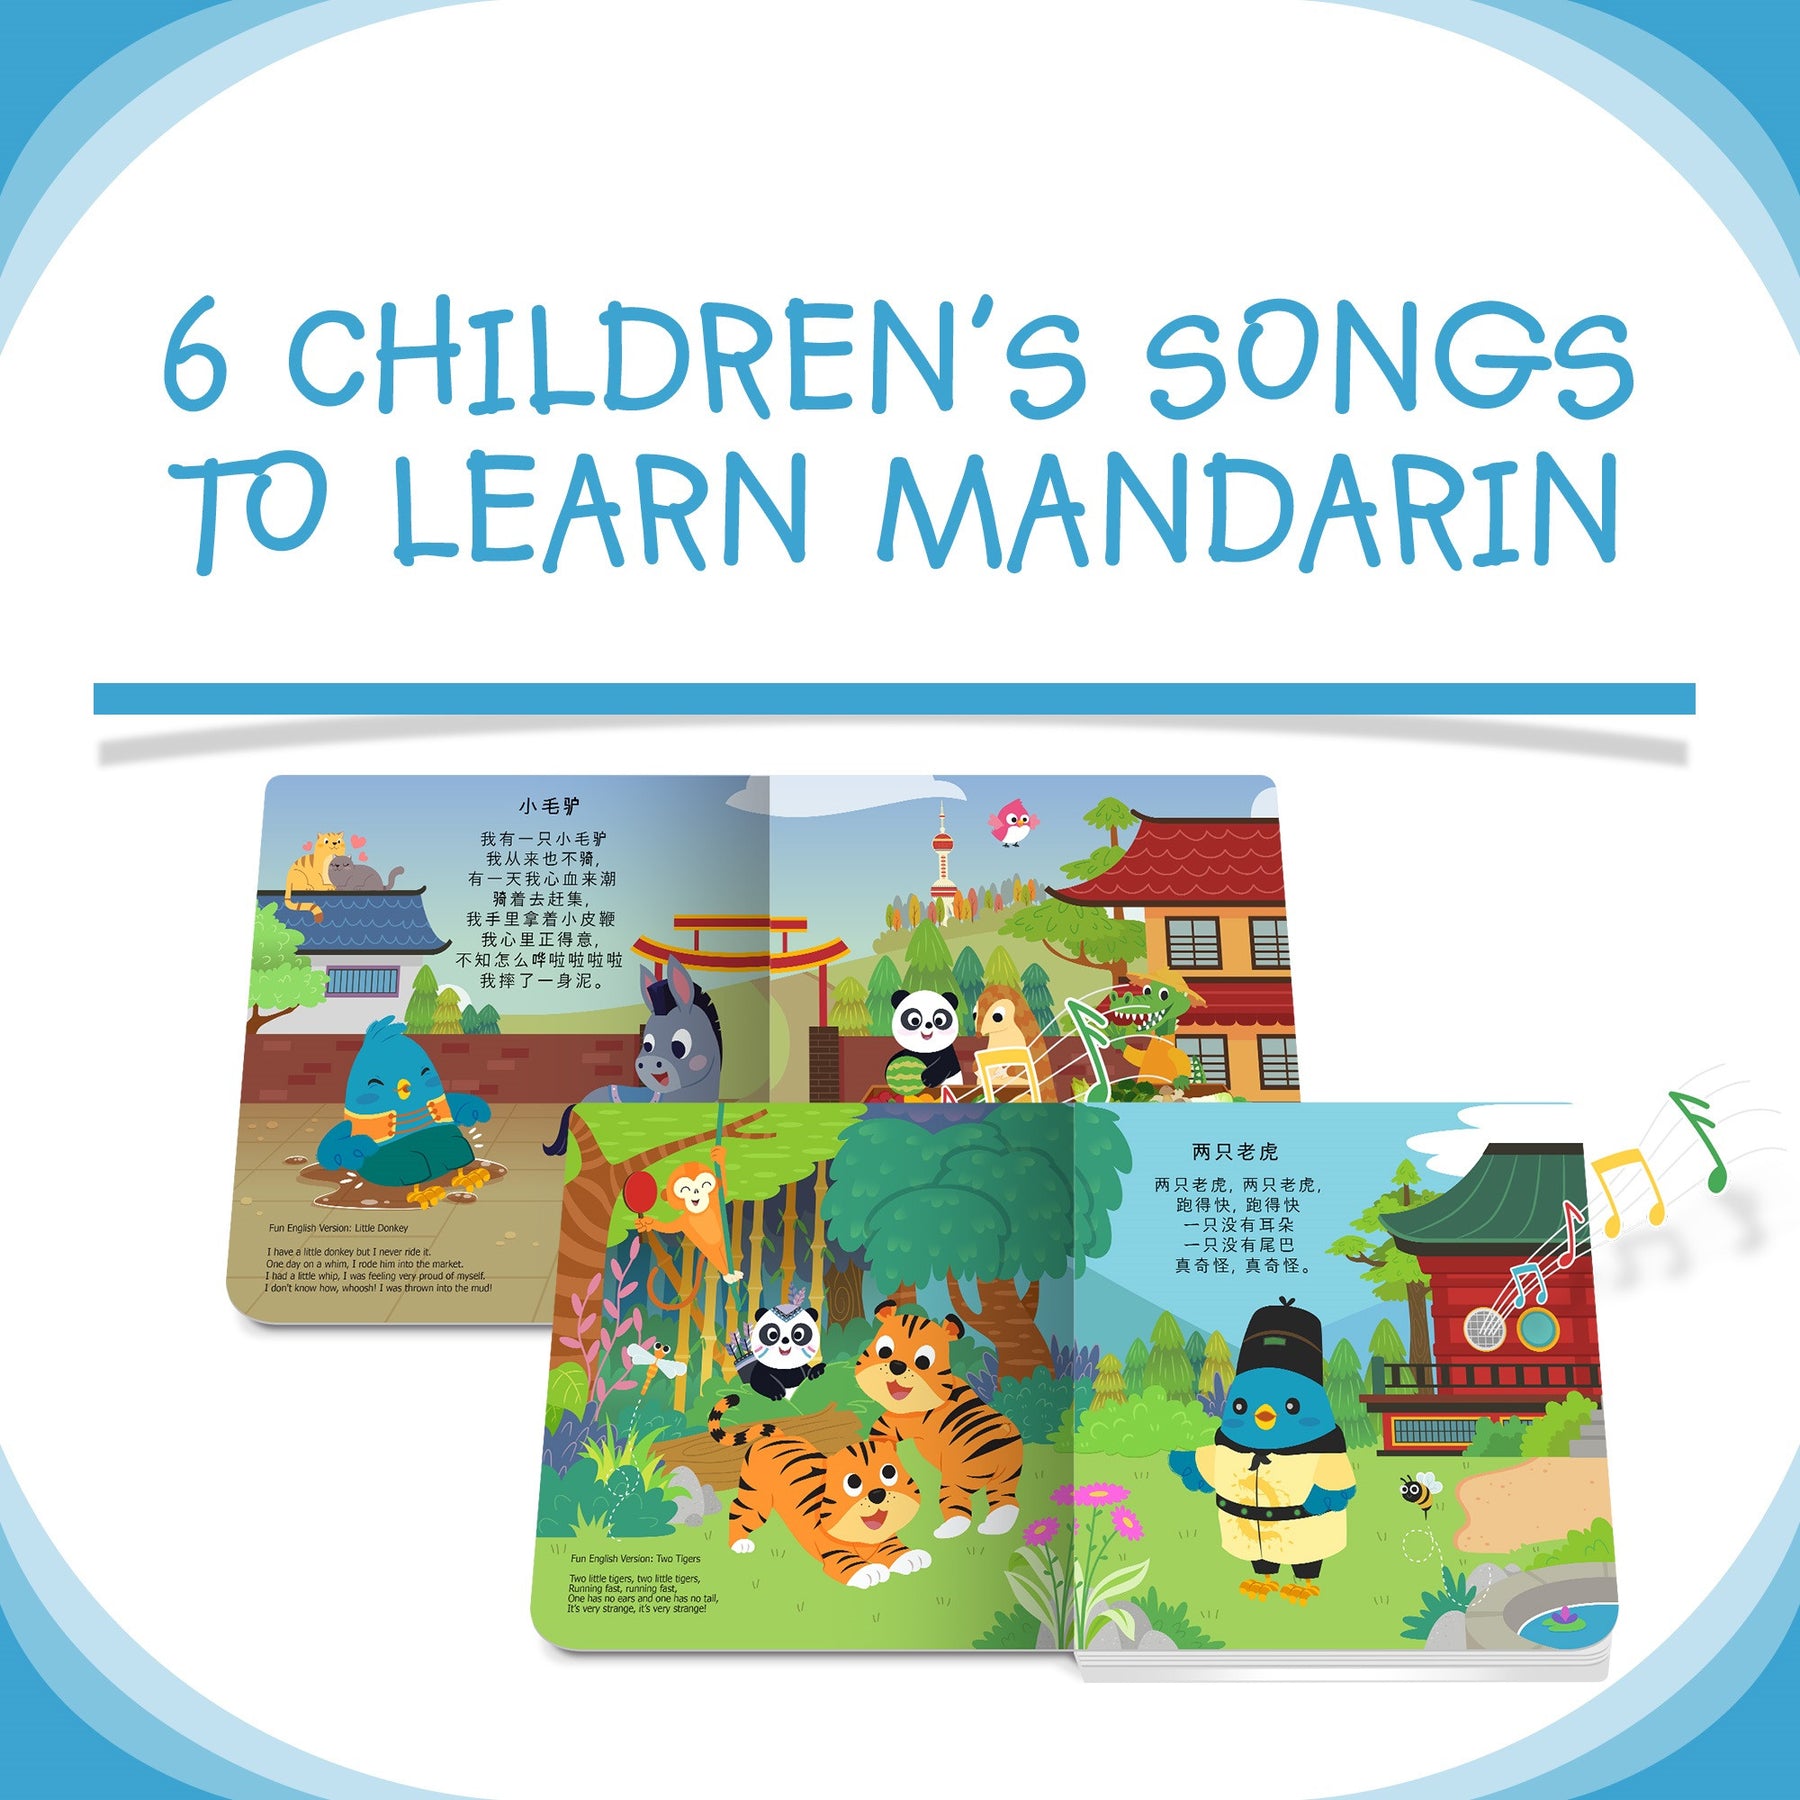 Ditty Bird Chinese Children's Songs Sounds Book [Authentic] - Audio Sound Book for Children Ages 1+ Ready Stocks [B1-2]